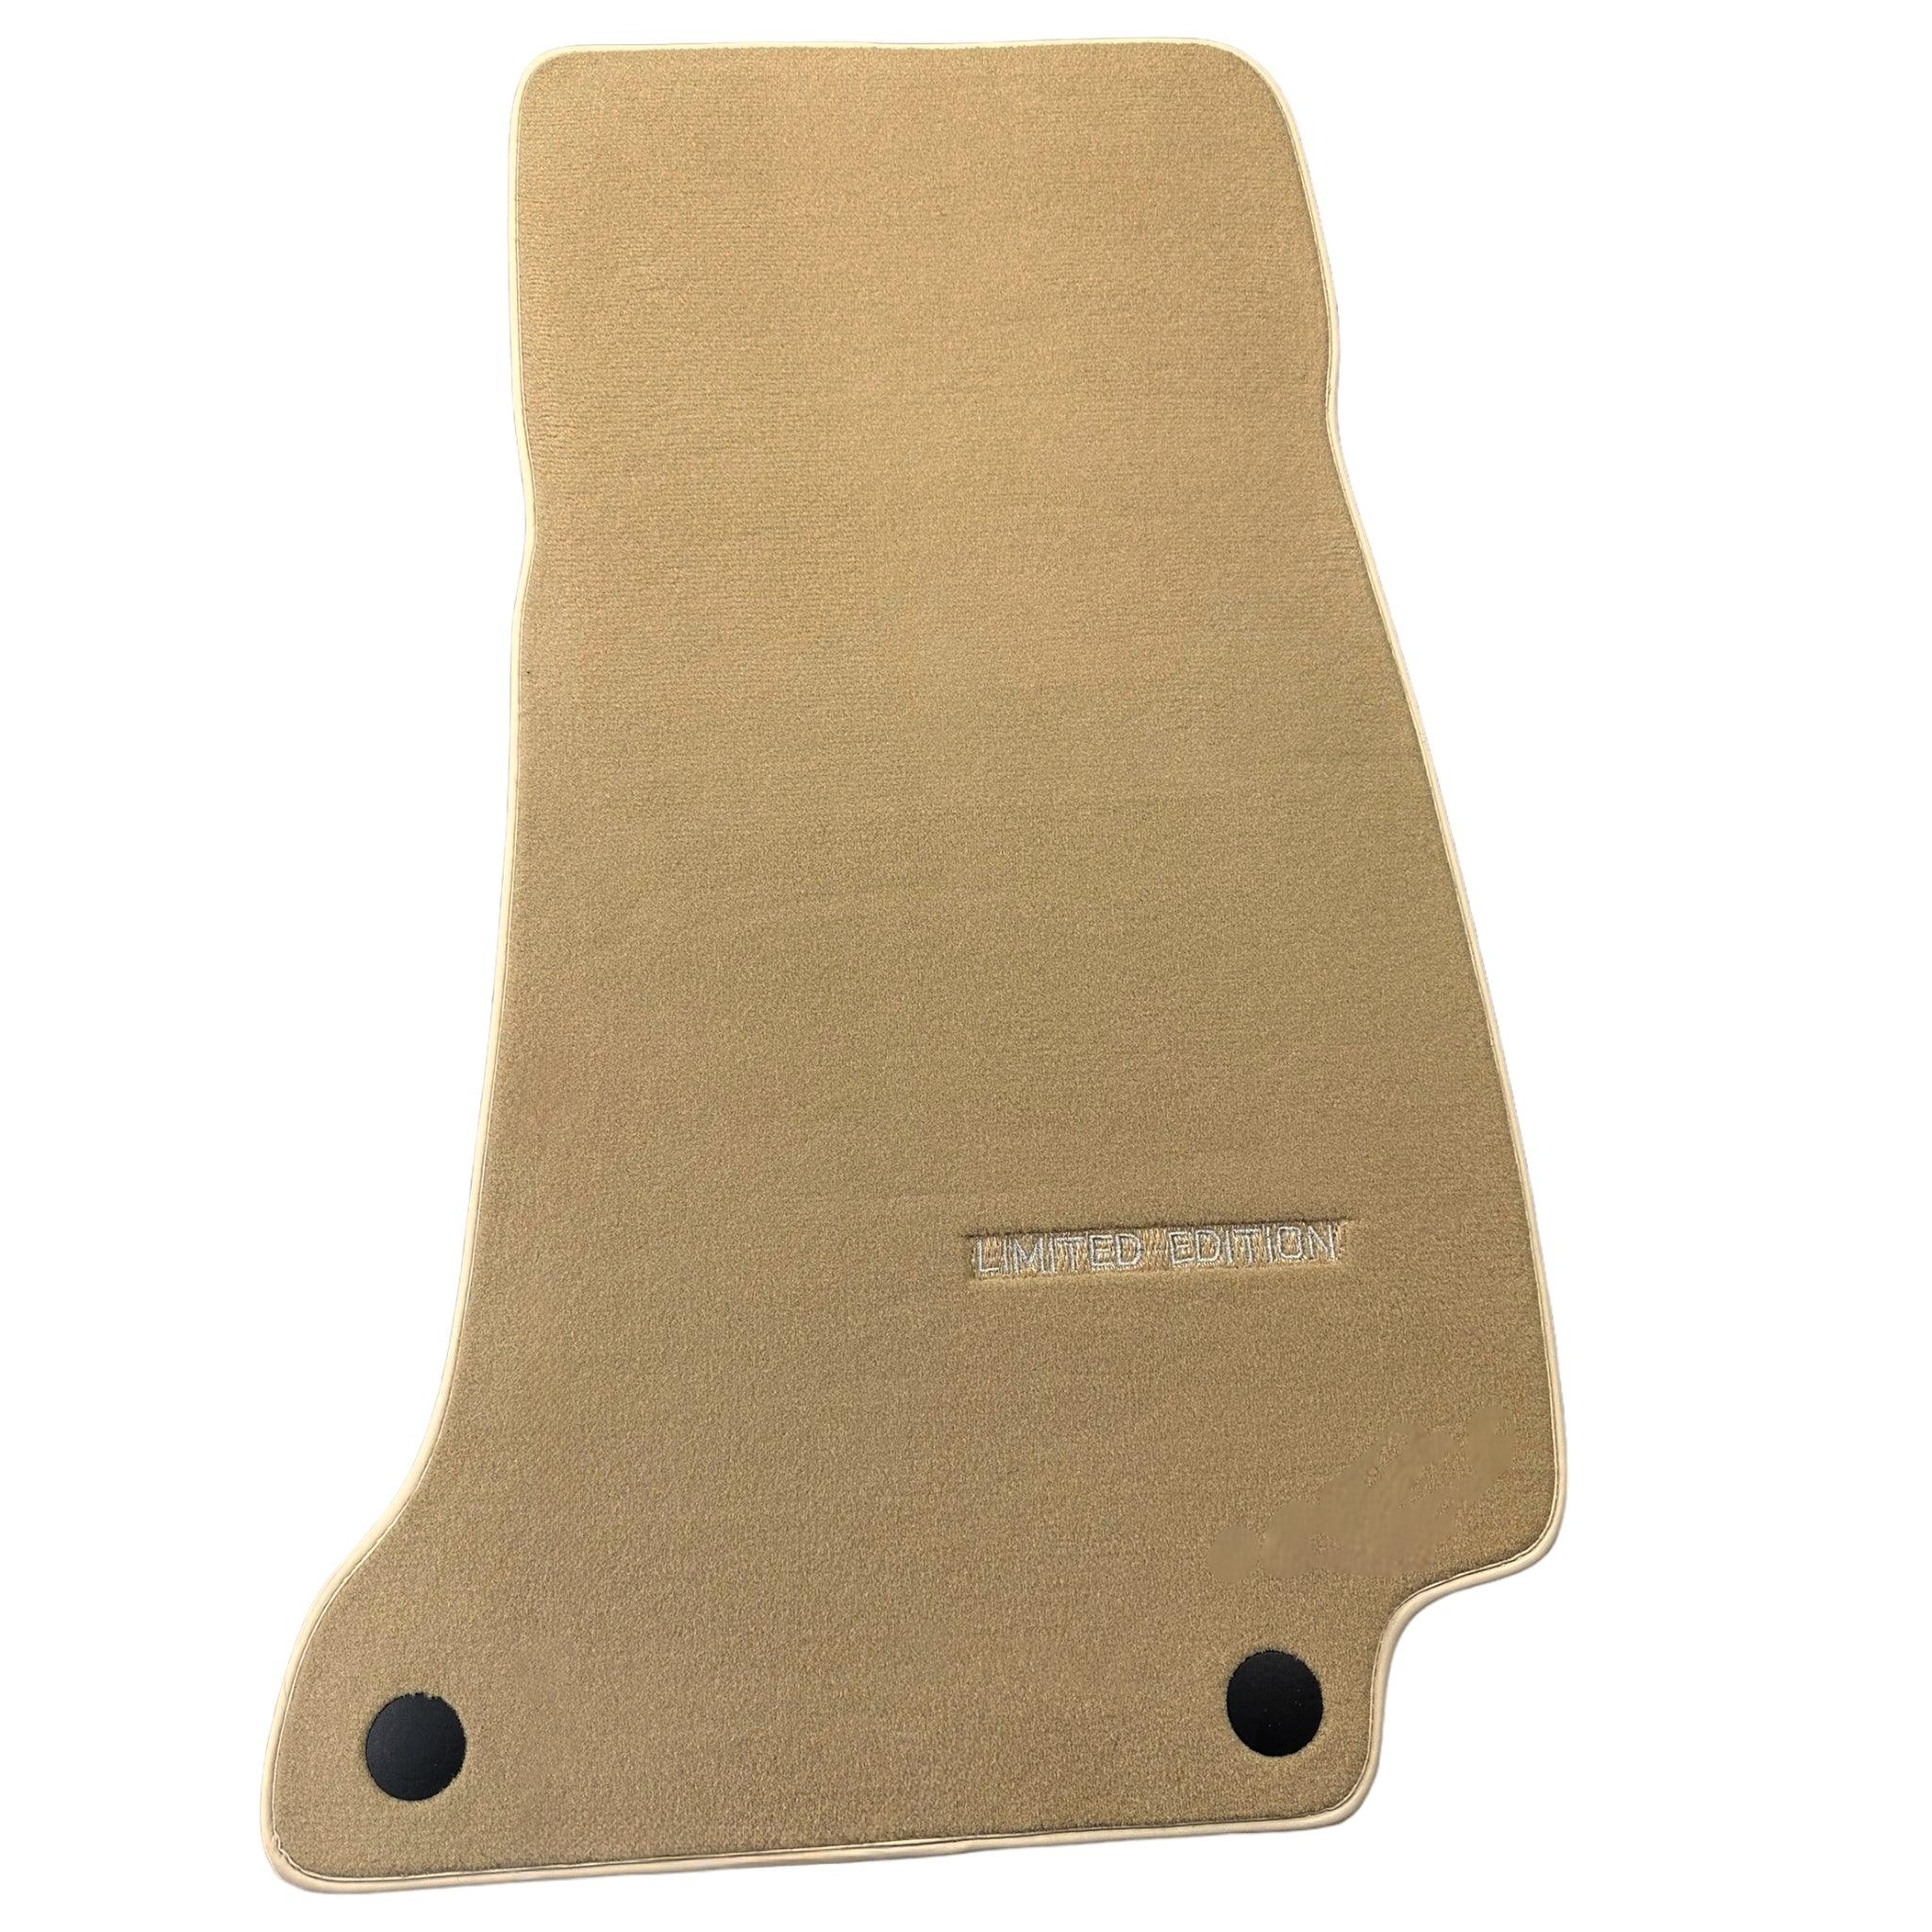 Beige Floor Mats For Mercedes Benz S-Class C126 Coupe (1981-1991) | Limited Edition